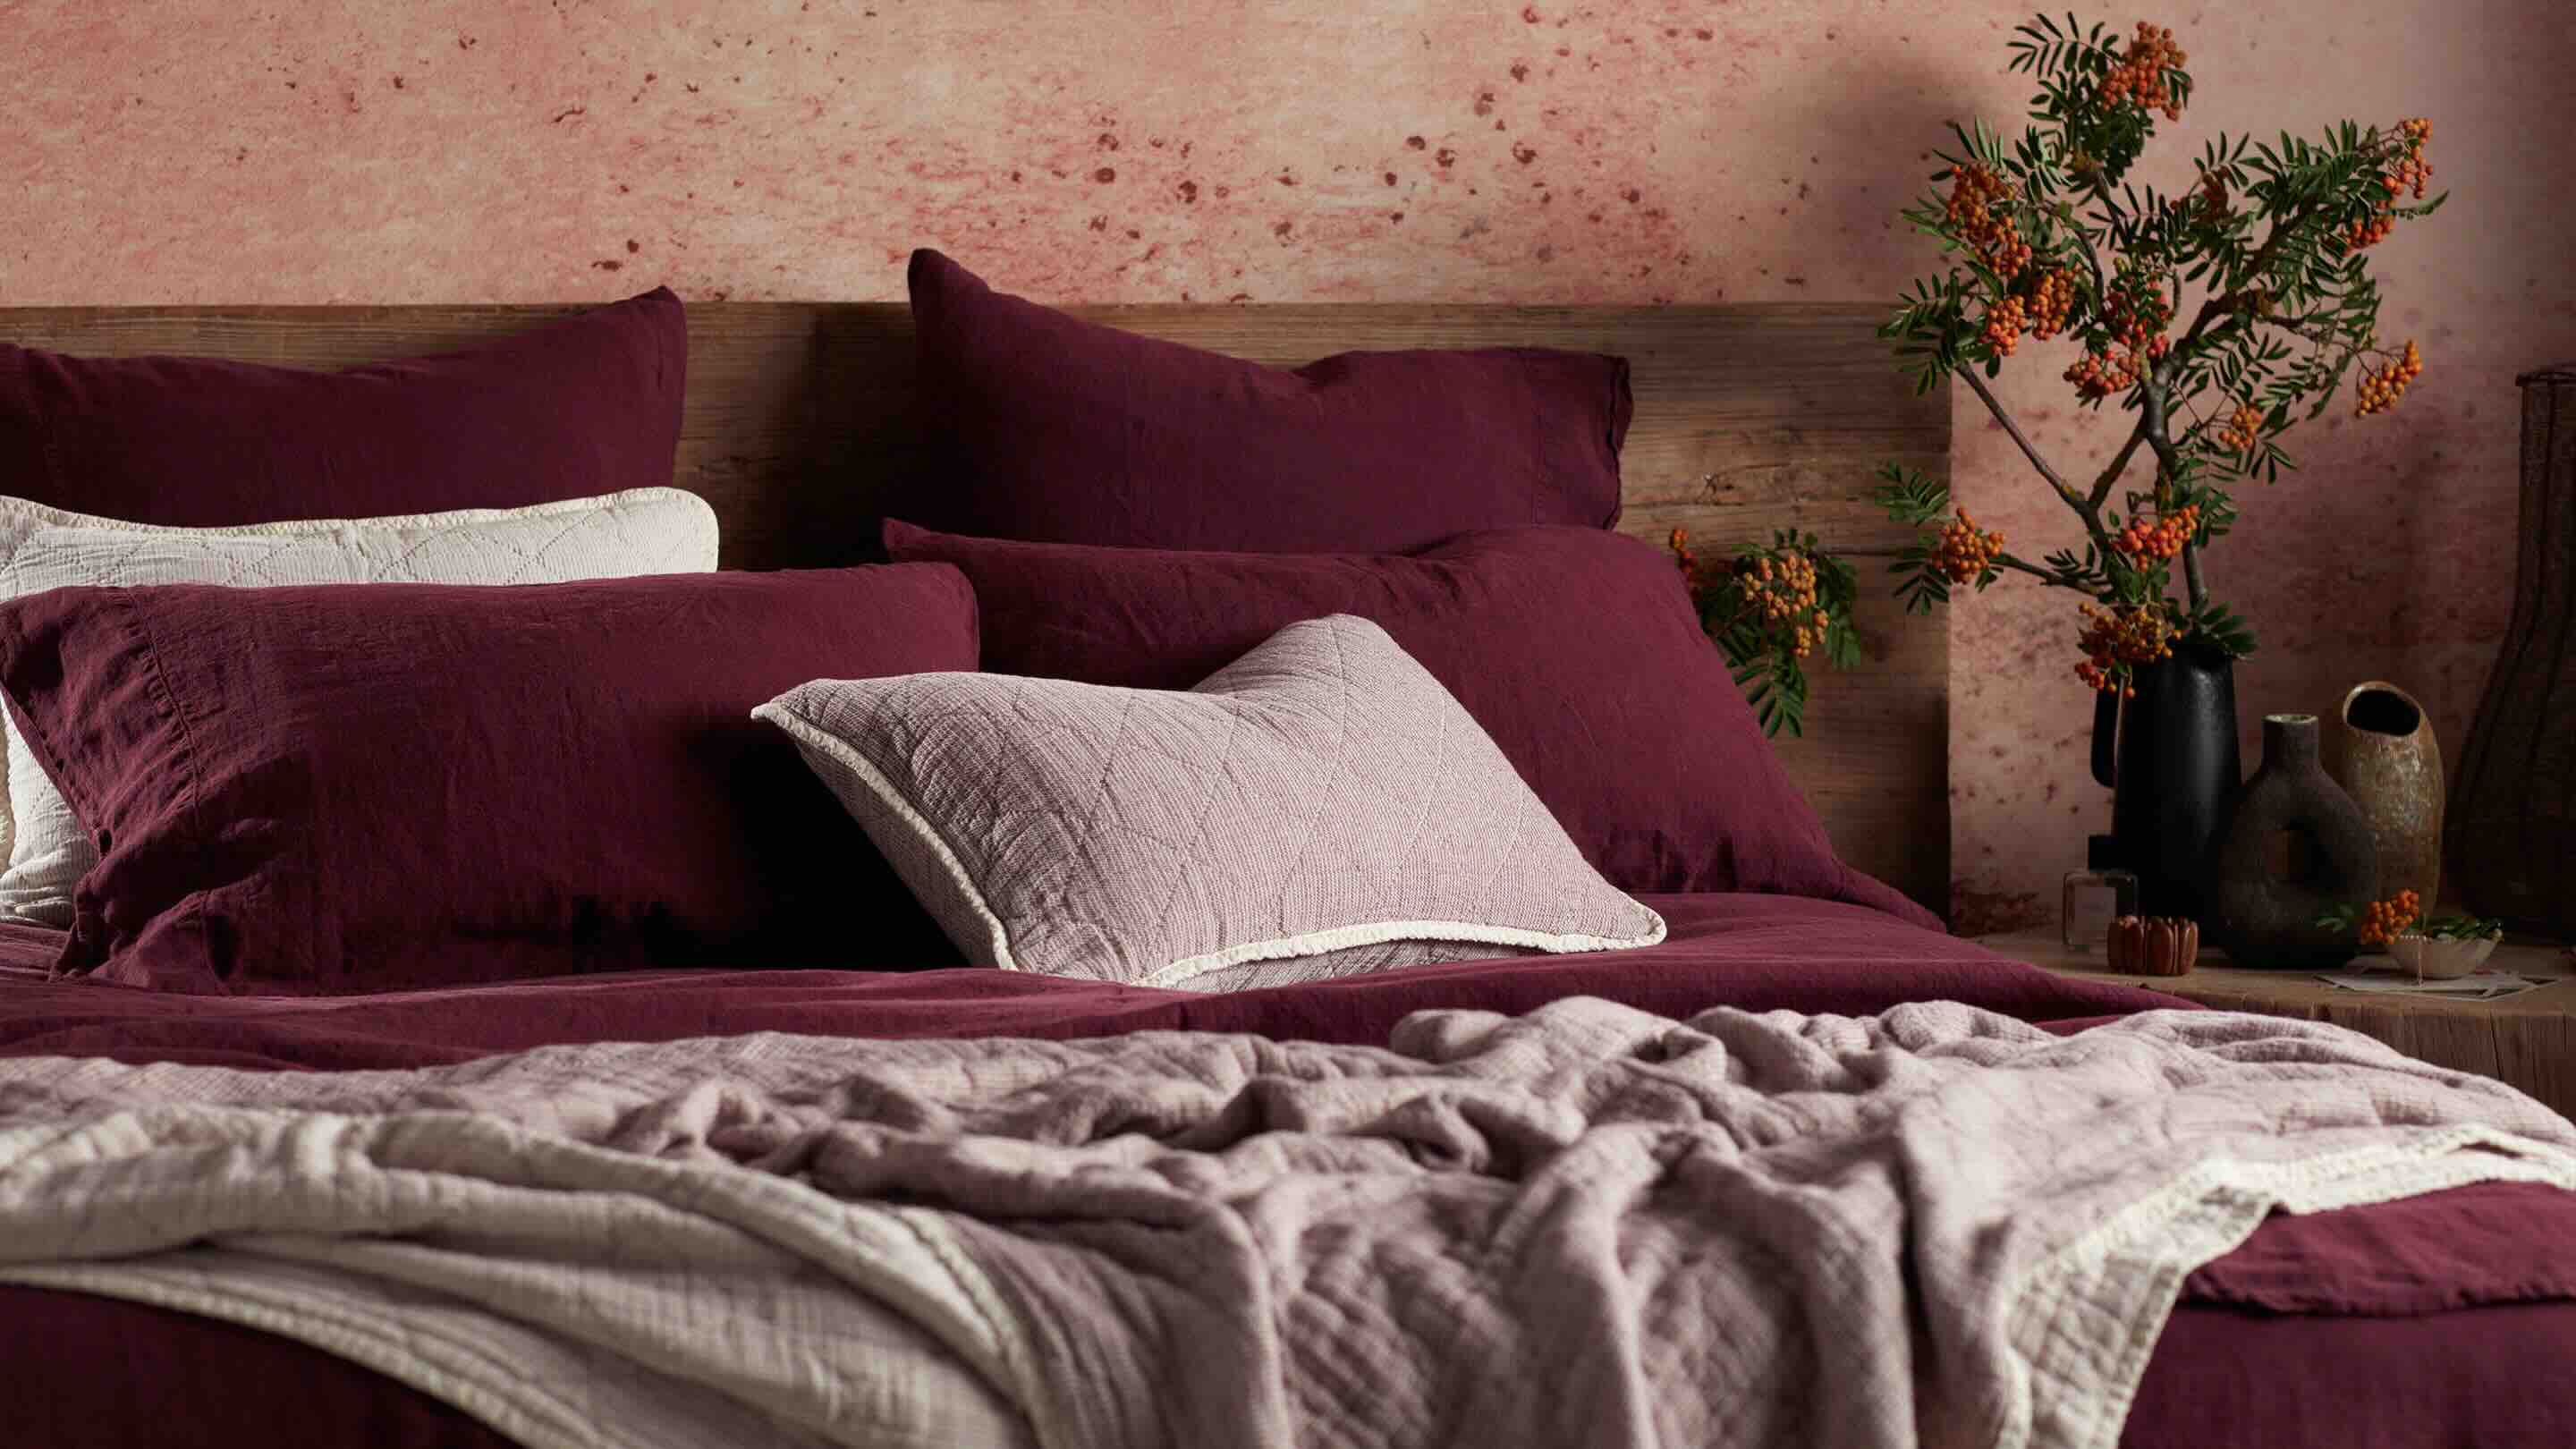 How To Choose The Right Color For Your Duvet Cover